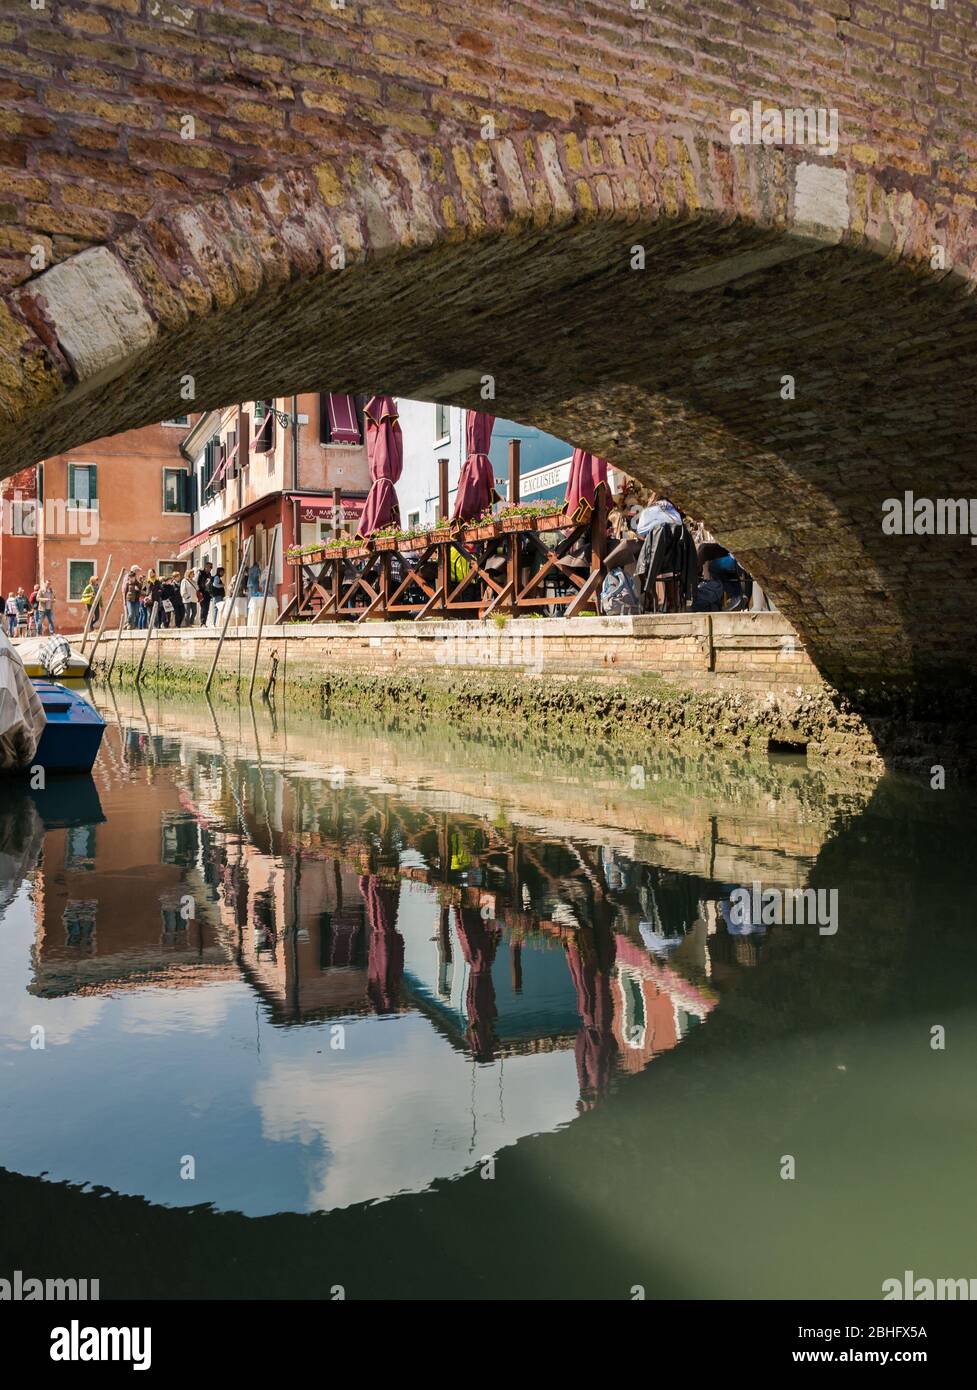 Venice, Italy - April 23, 2017: Characteristic brick pedestrian bridge that crosses one of the many navigable canals in Venice. Stock Photo